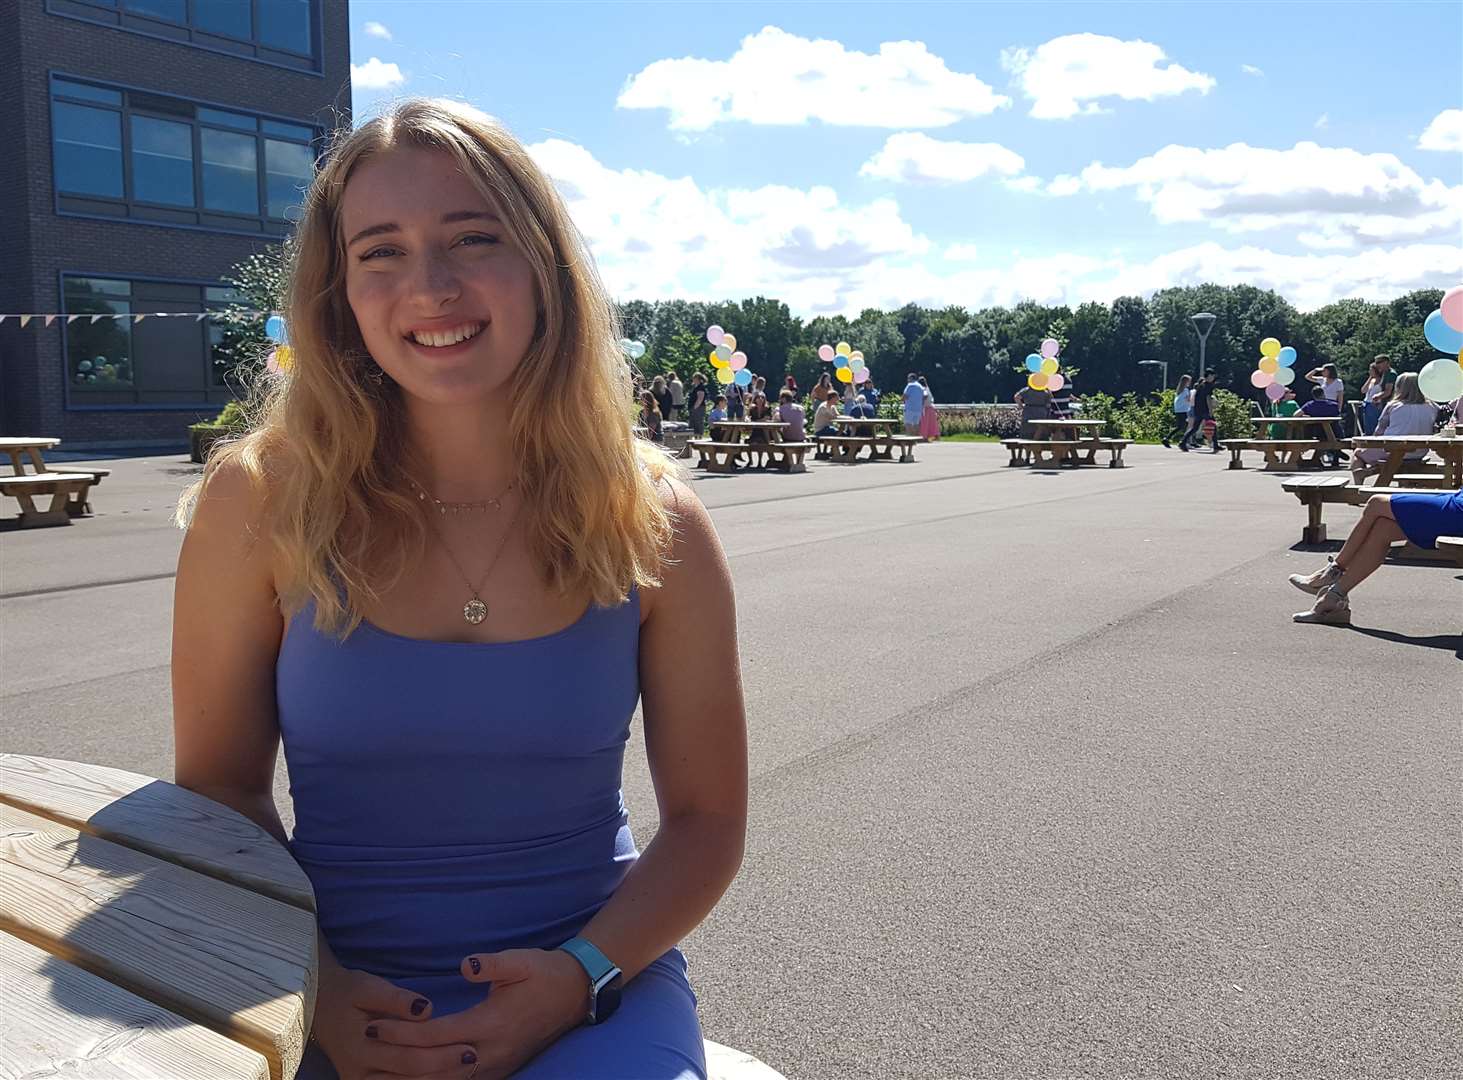 Maria Bragin from Invicta Grammar School achieved an A*in Maths, an A* in biology, an A in chemistry and an A* in her extended project qualification